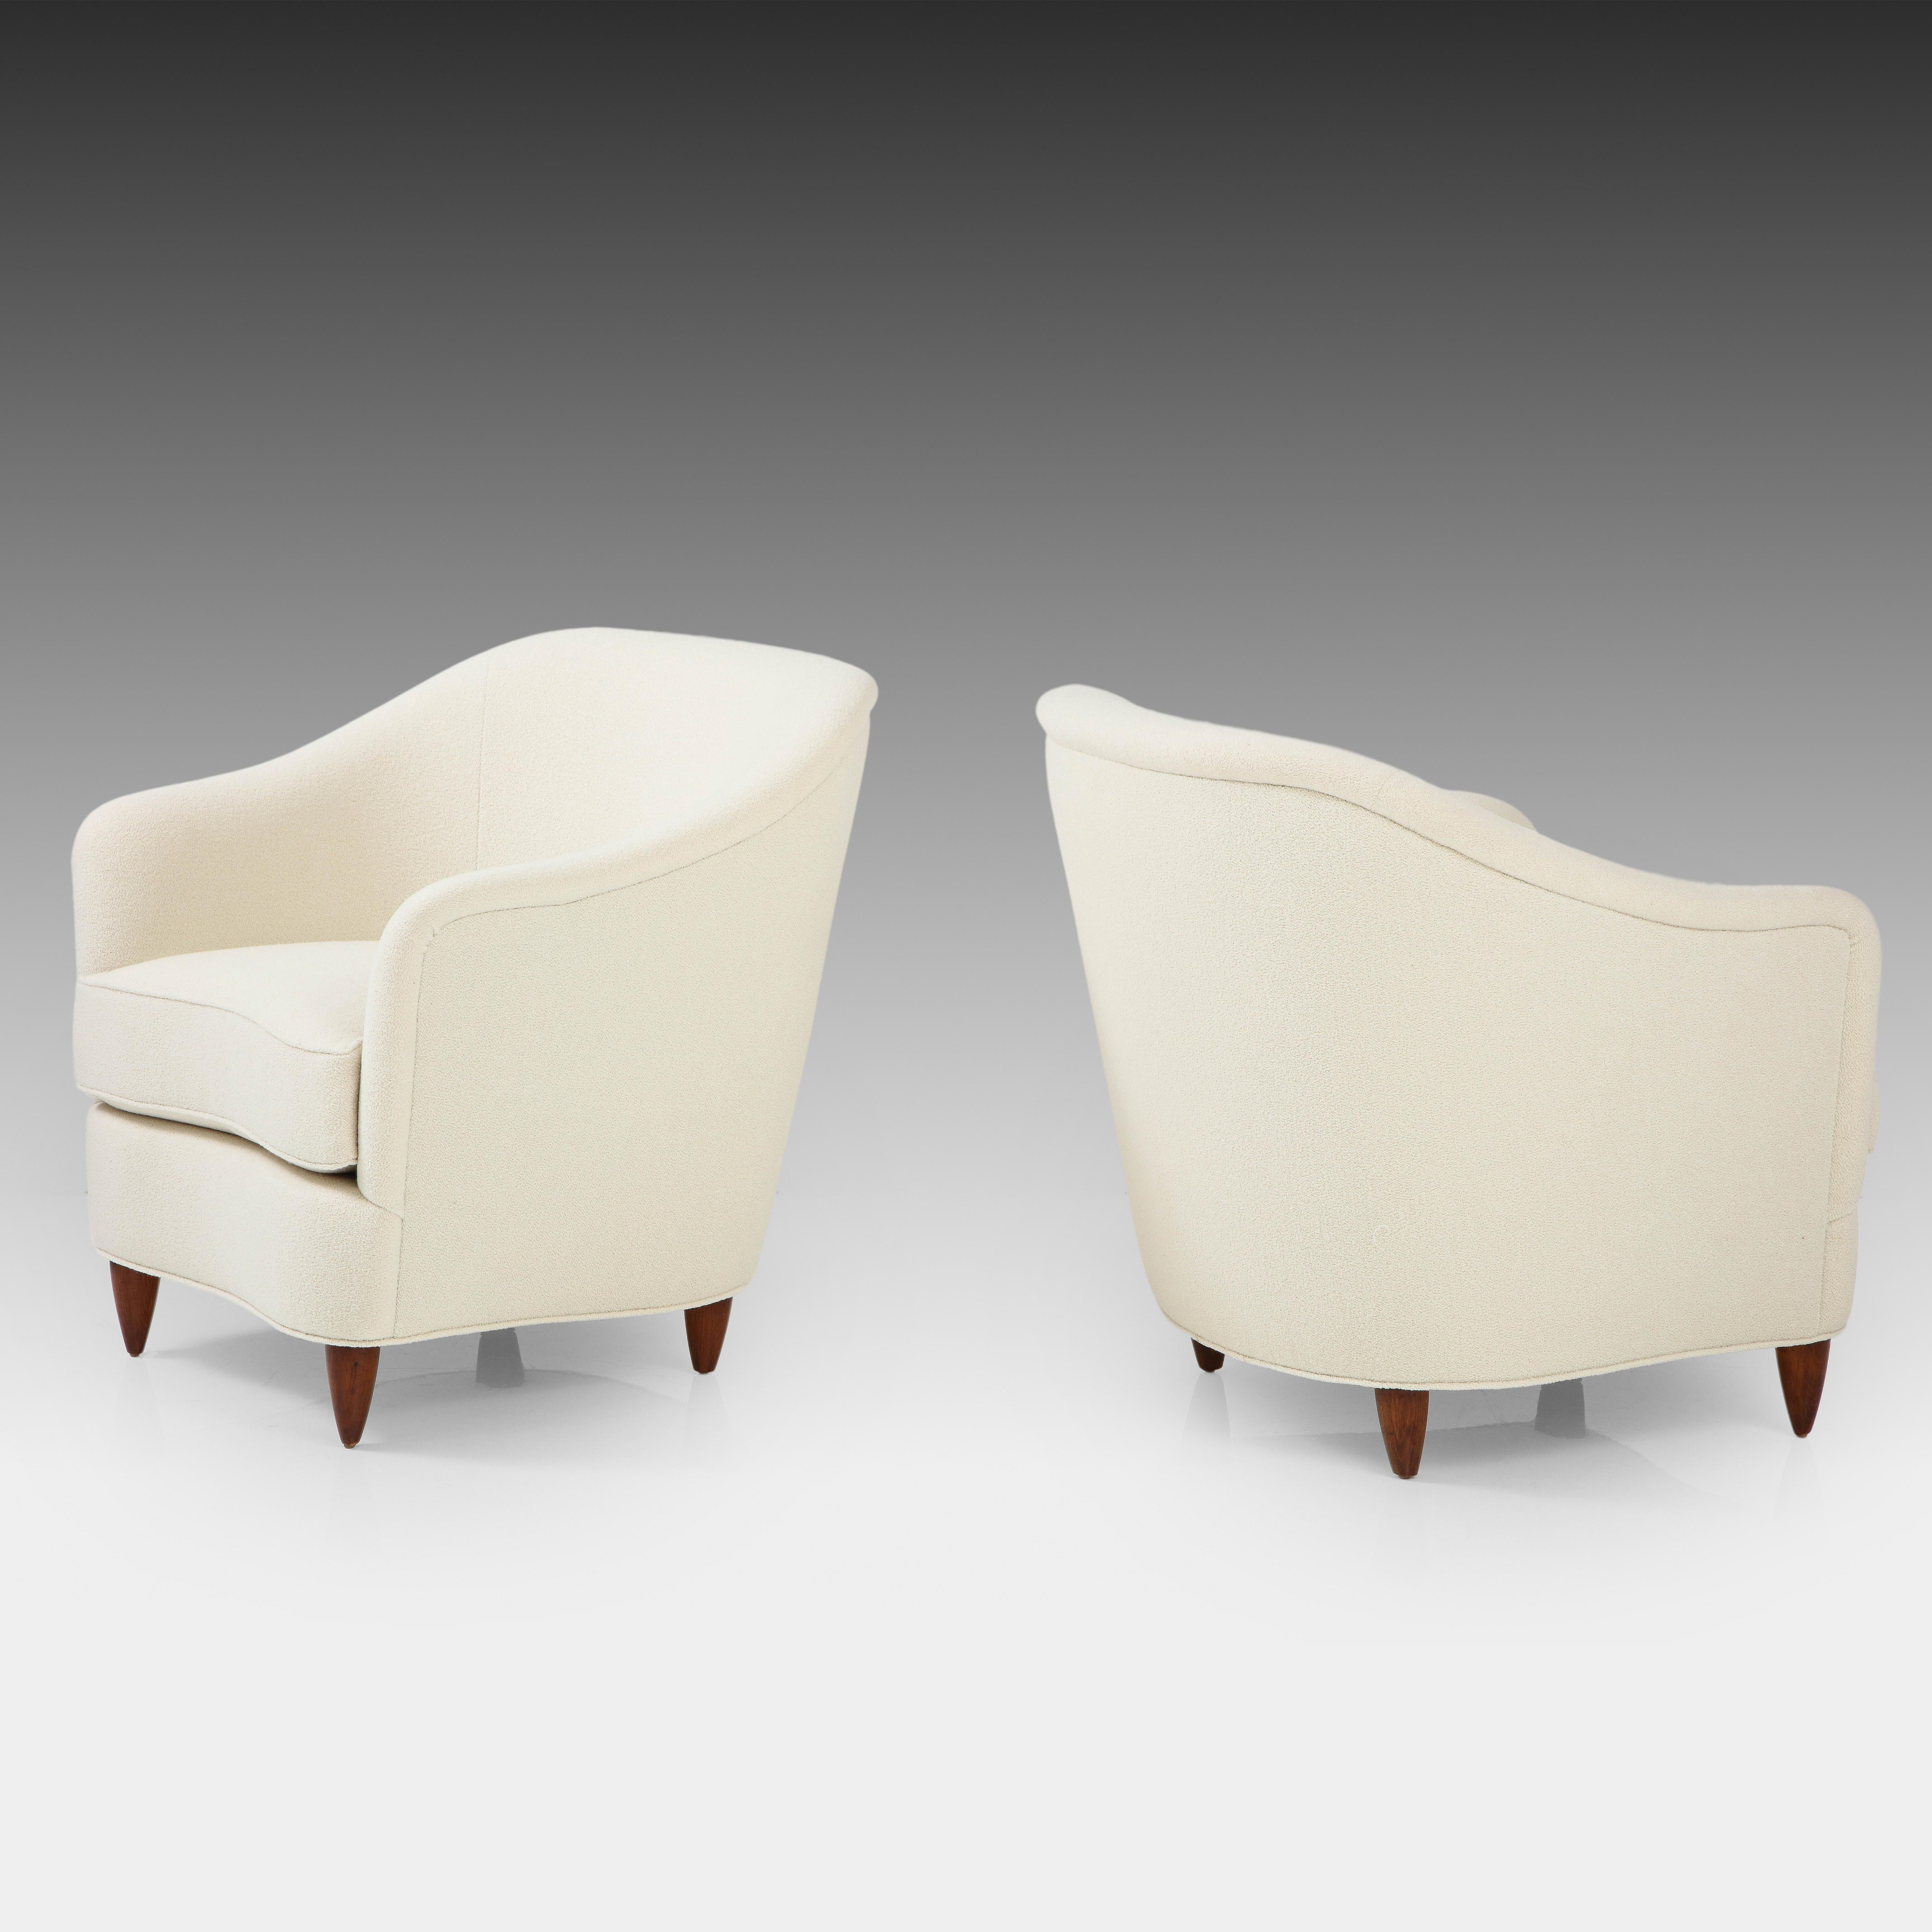 Mid-20th Century Gio Ponti for Casa e Giardino Pair of Armchairs or Lounge Chairs in Ivory Bouclé